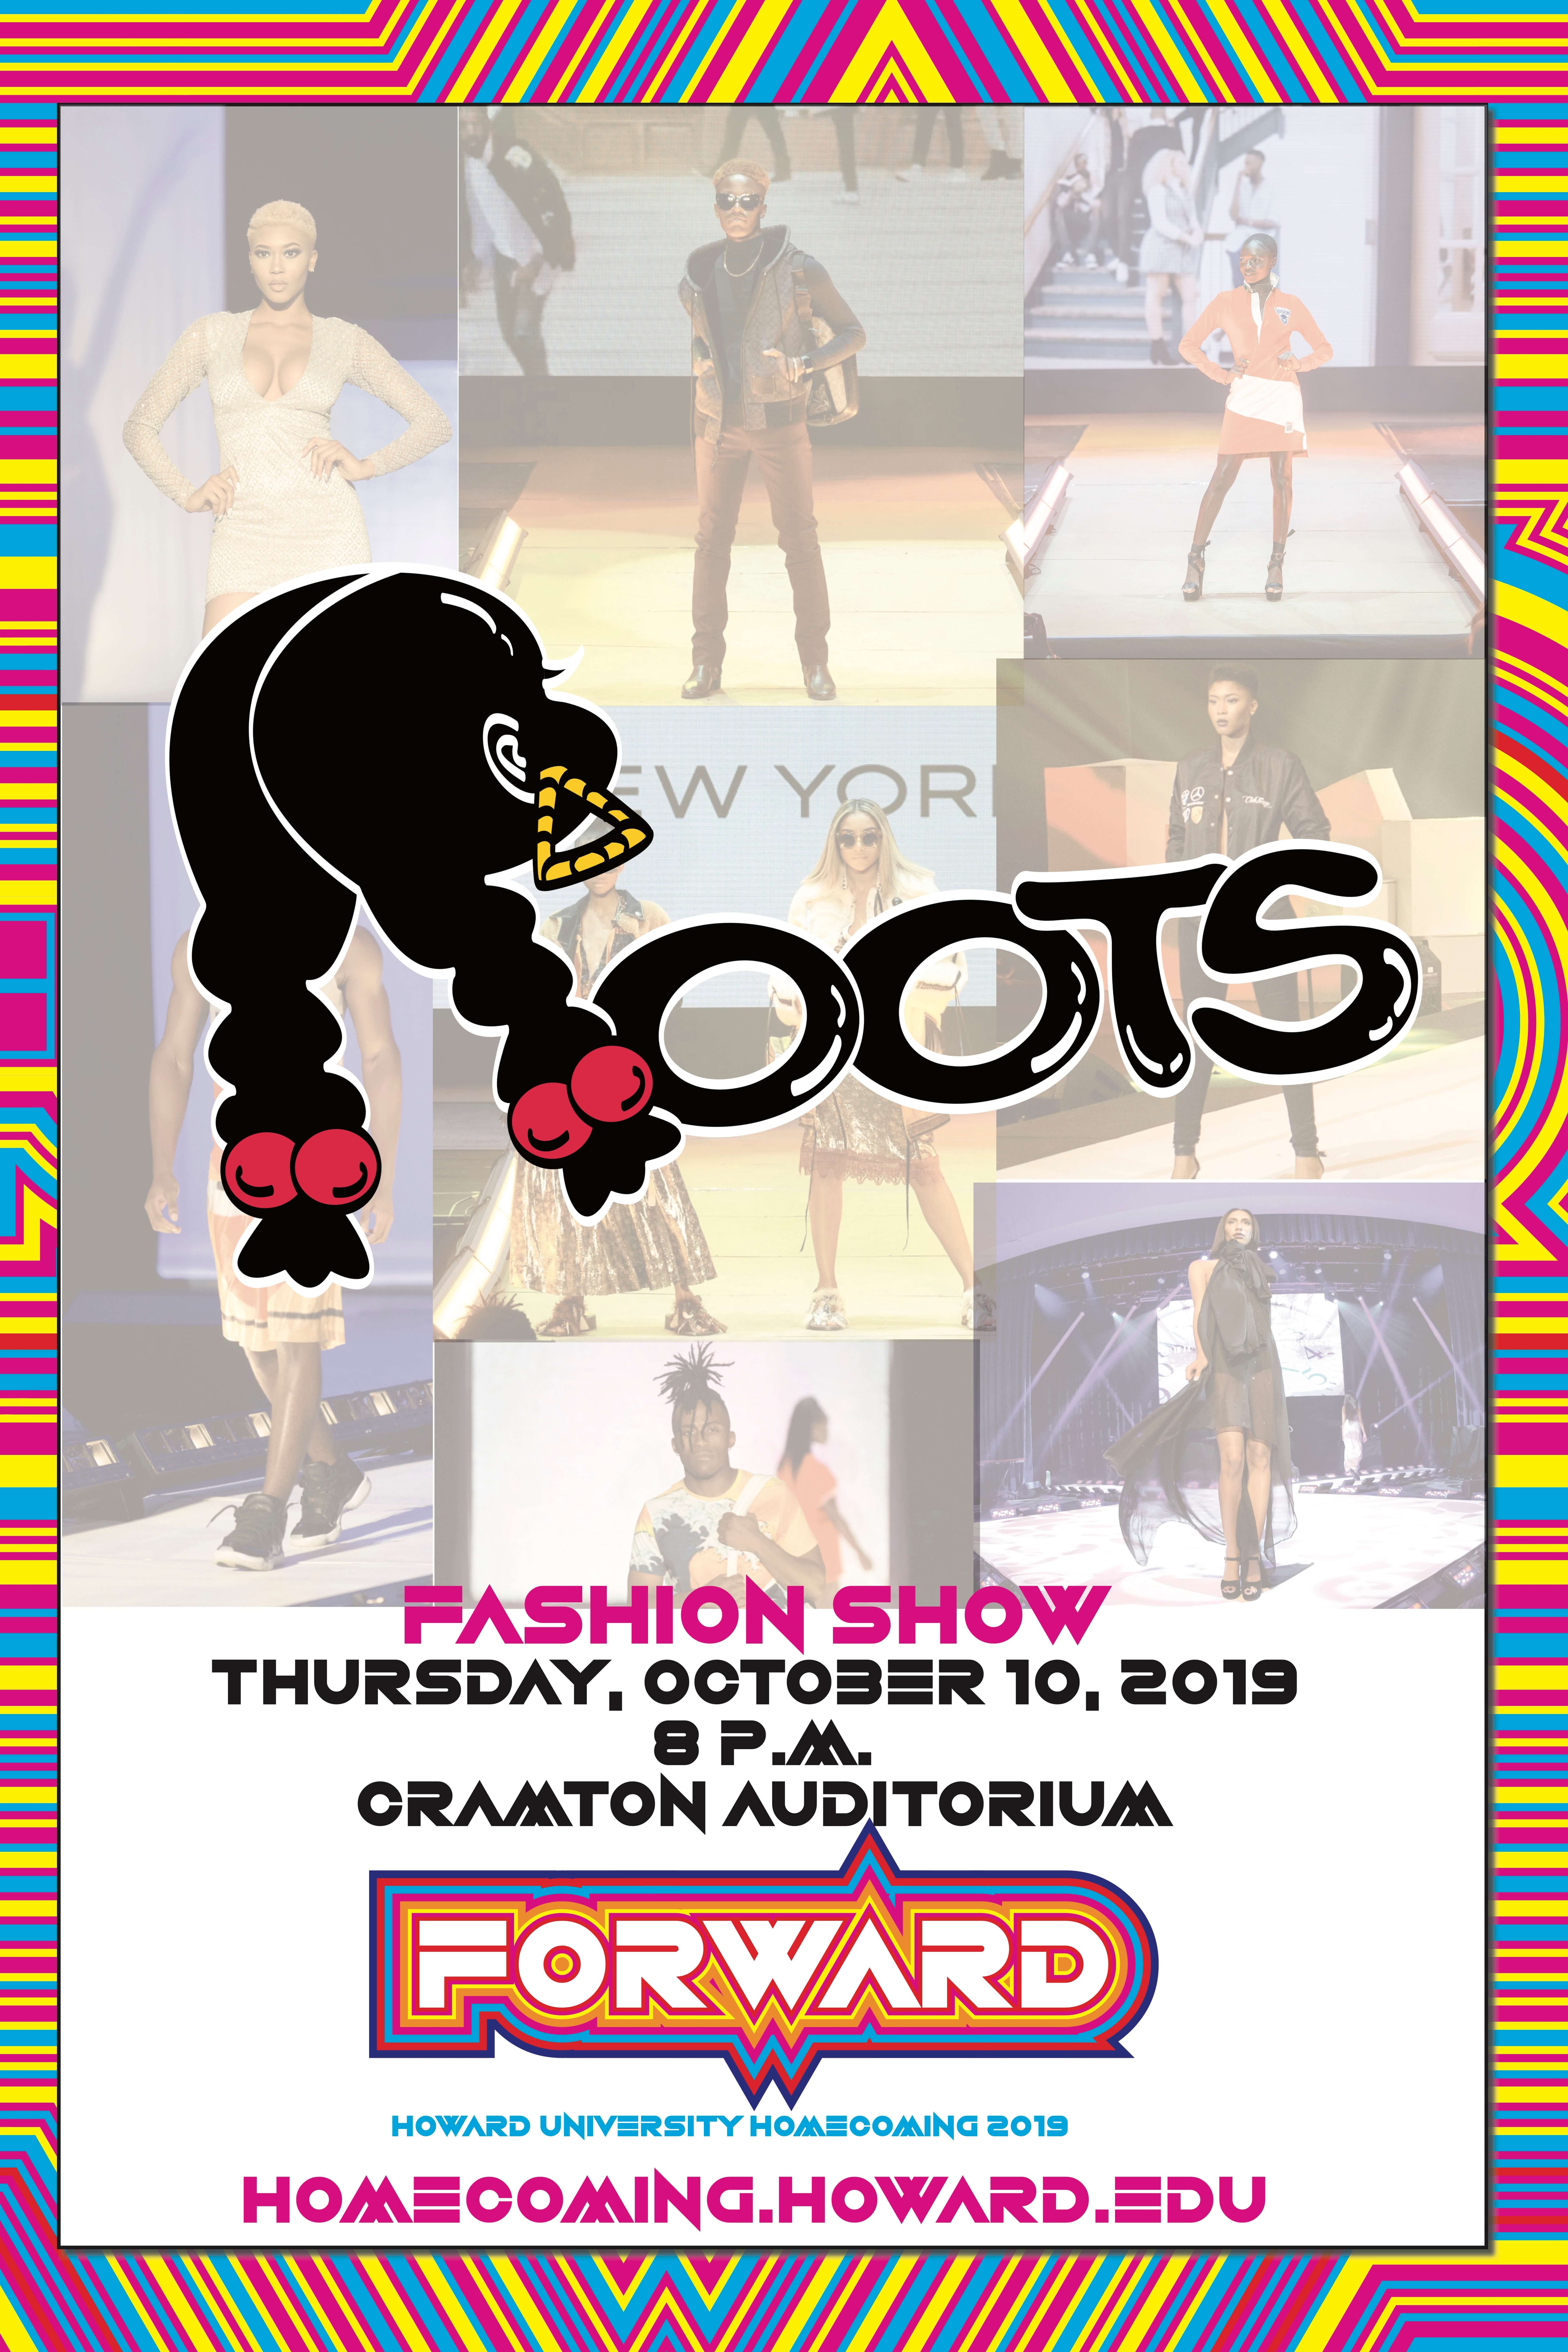 2019 Howard Homecoming Fashion Show, scheduled Thursday, October 10, 2019 at 8 p.m